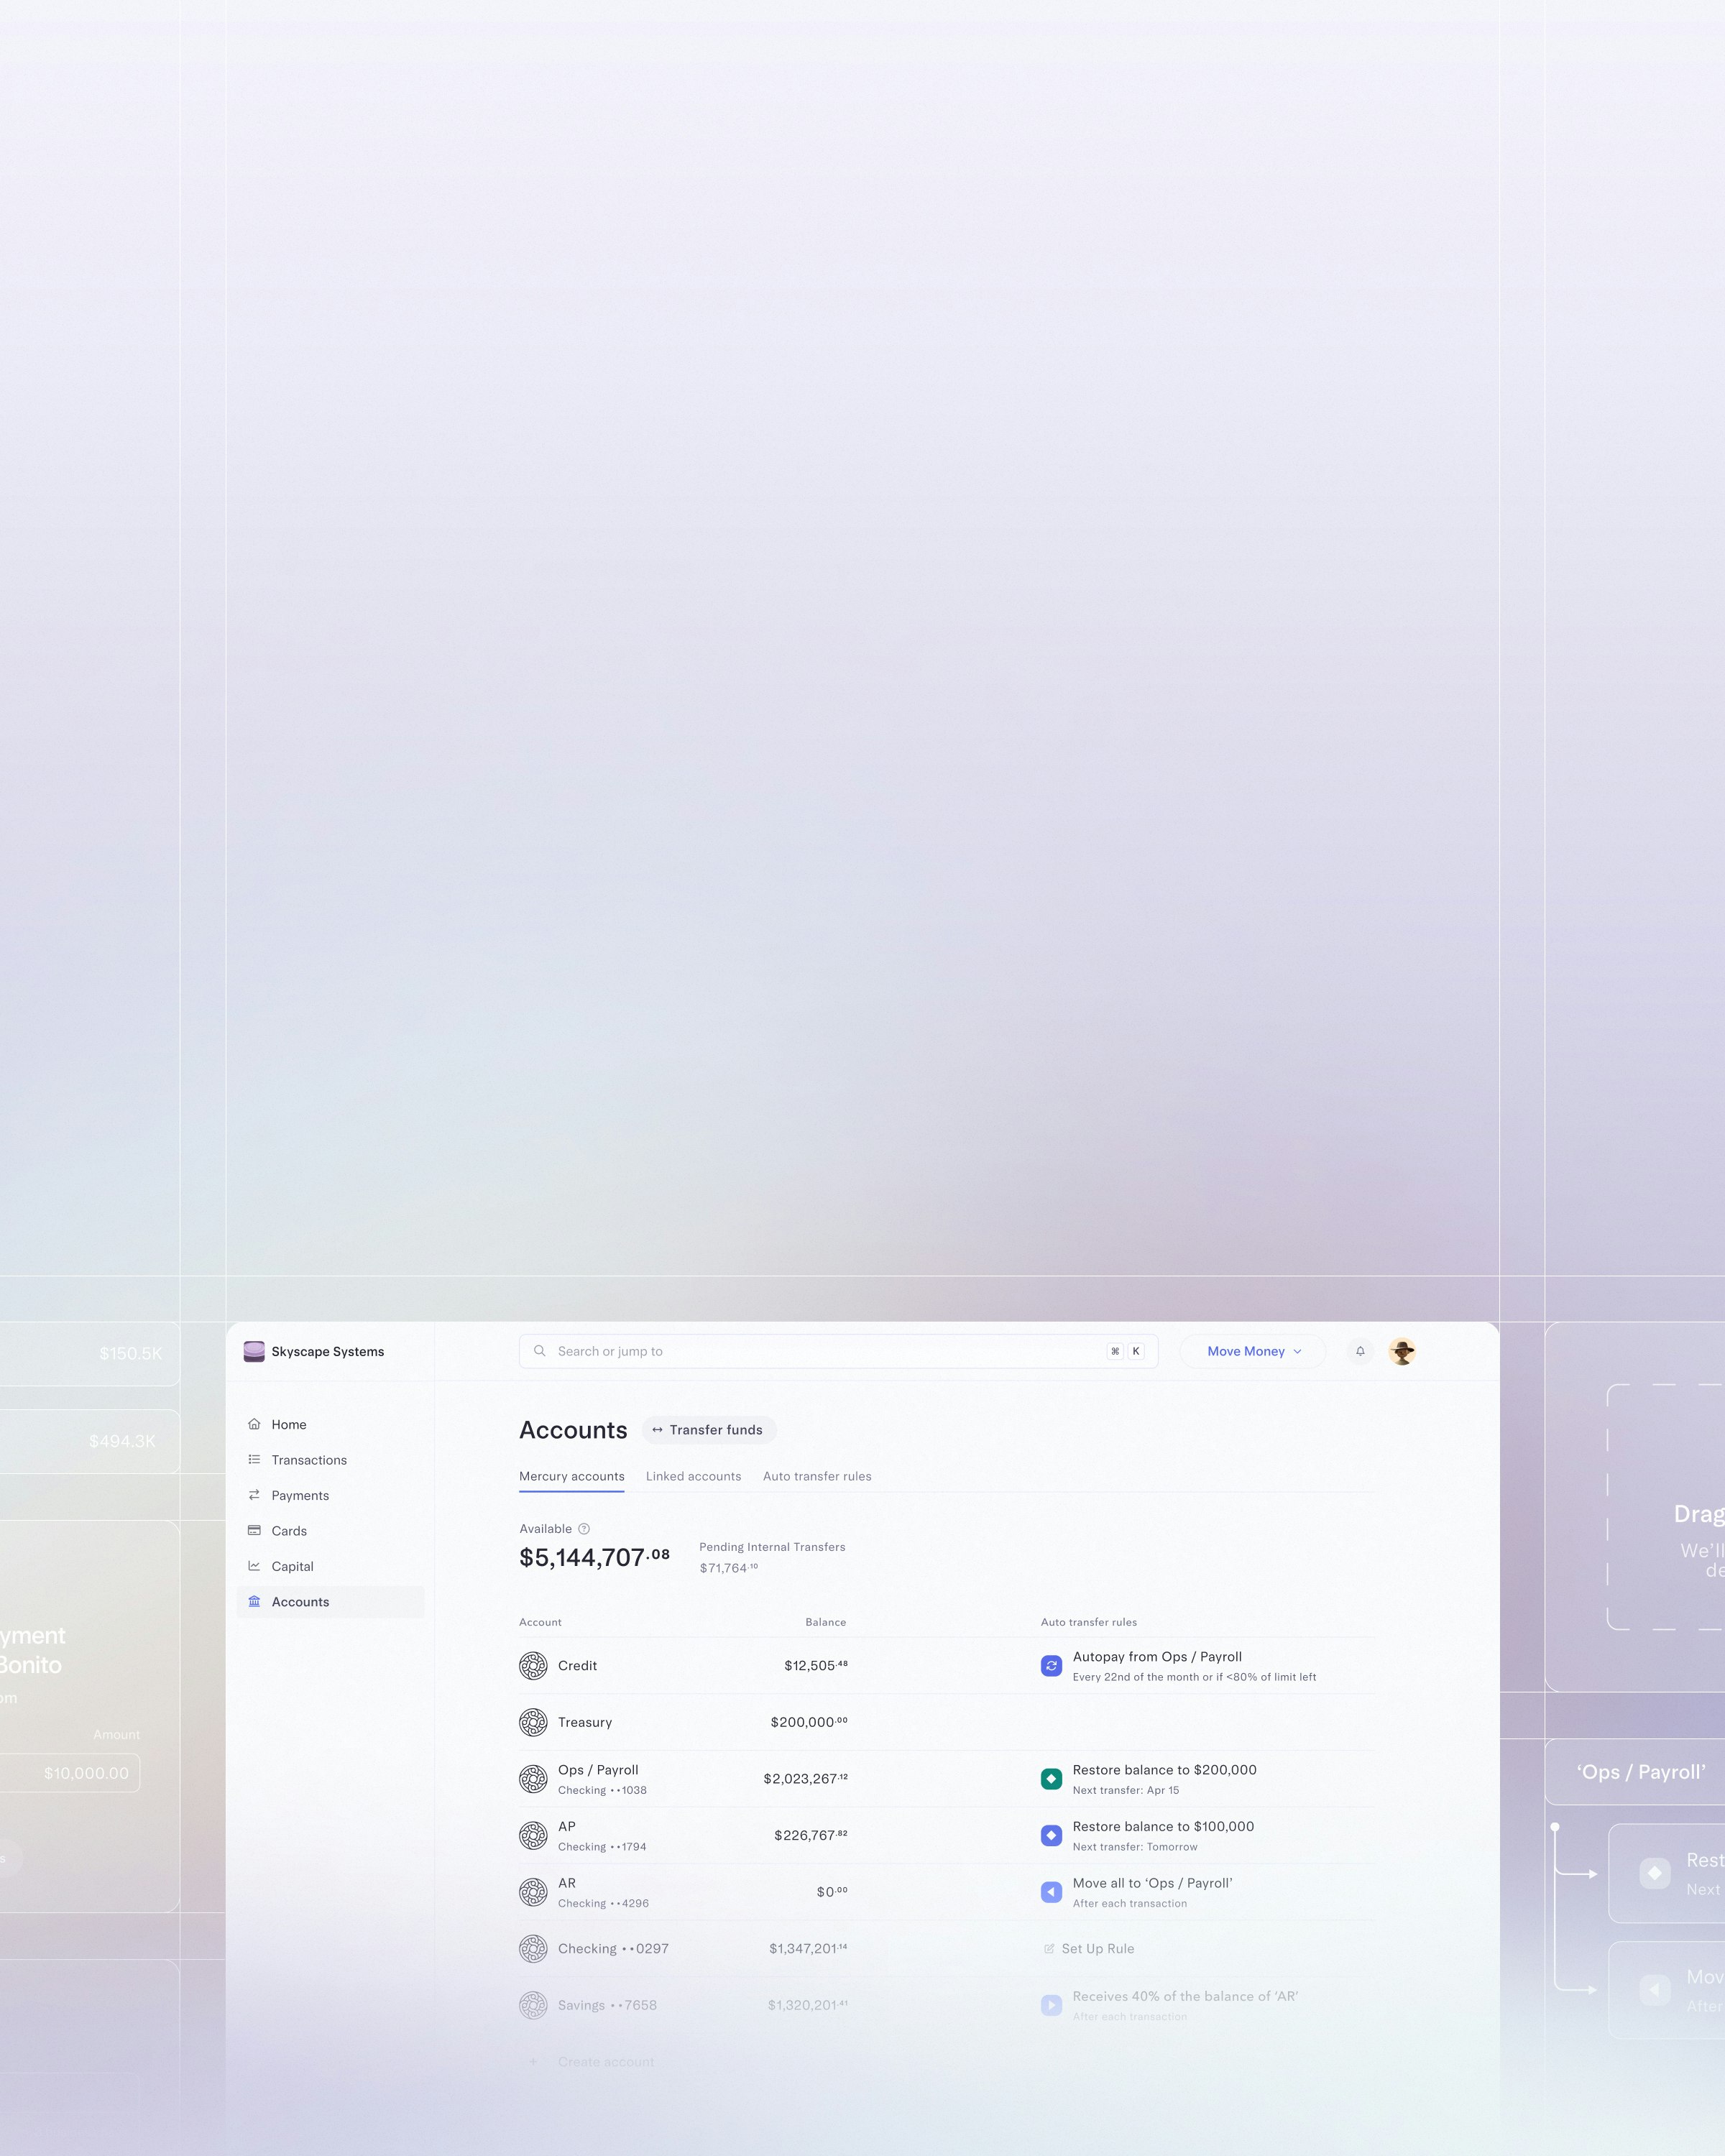 Transparent UI and gridlines surrounding the accounts dashboard